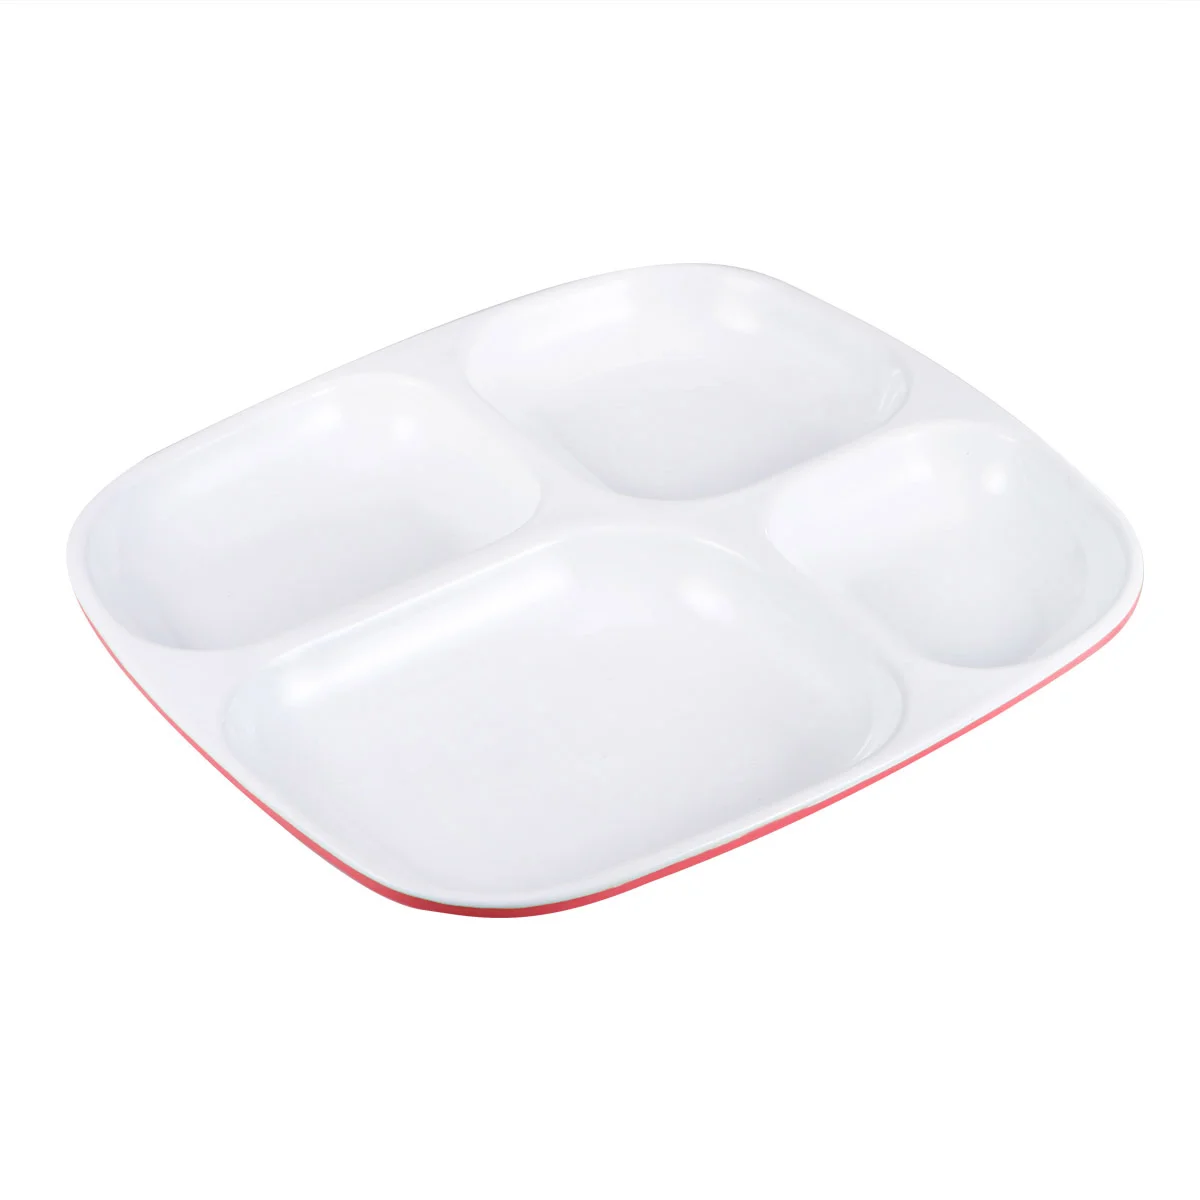 

4 Grid Separating Dish Divided Compartments Plate Anti-fall Rice Tray Practical Tableware for Home Restaurant (Red and White)